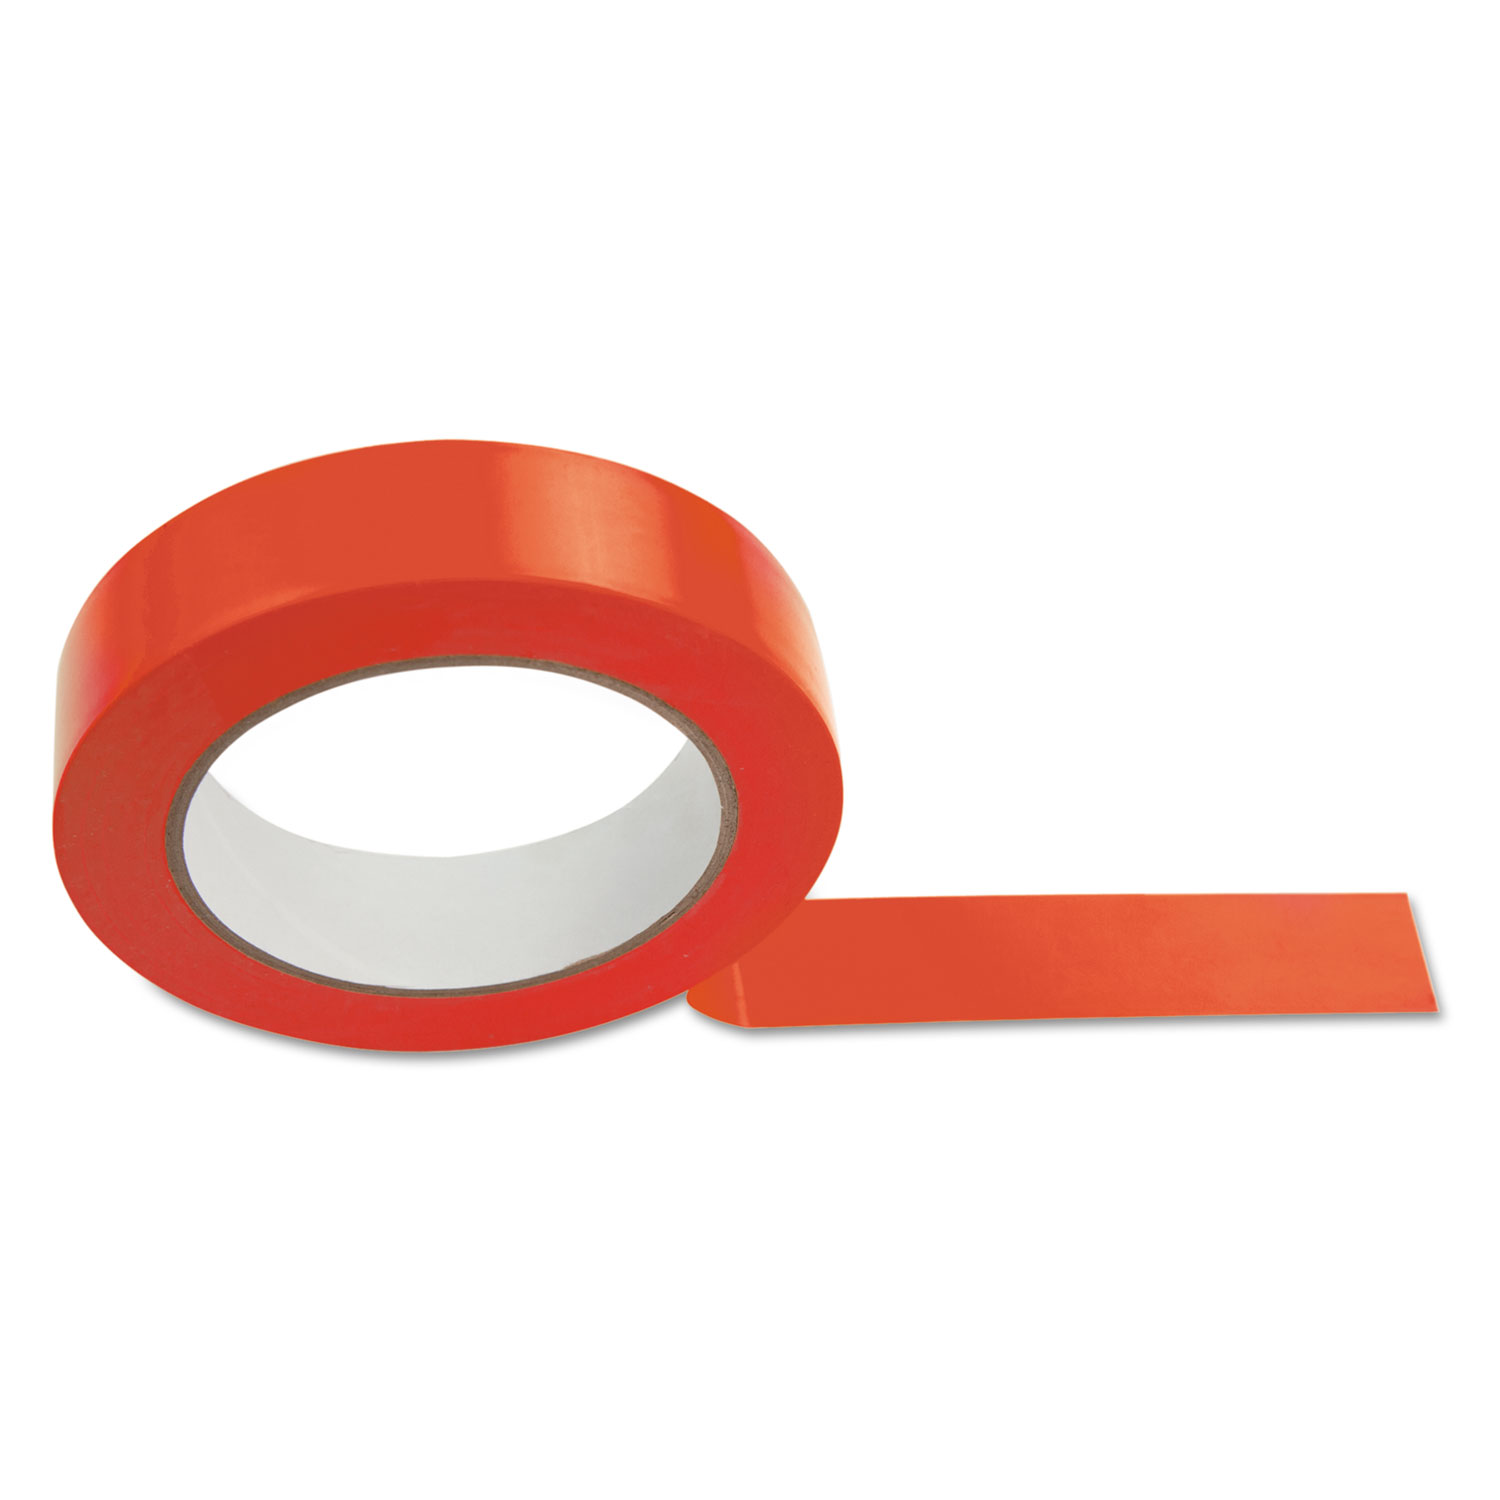 Champion 1 x 36 yds Sports Floor Tape, Red